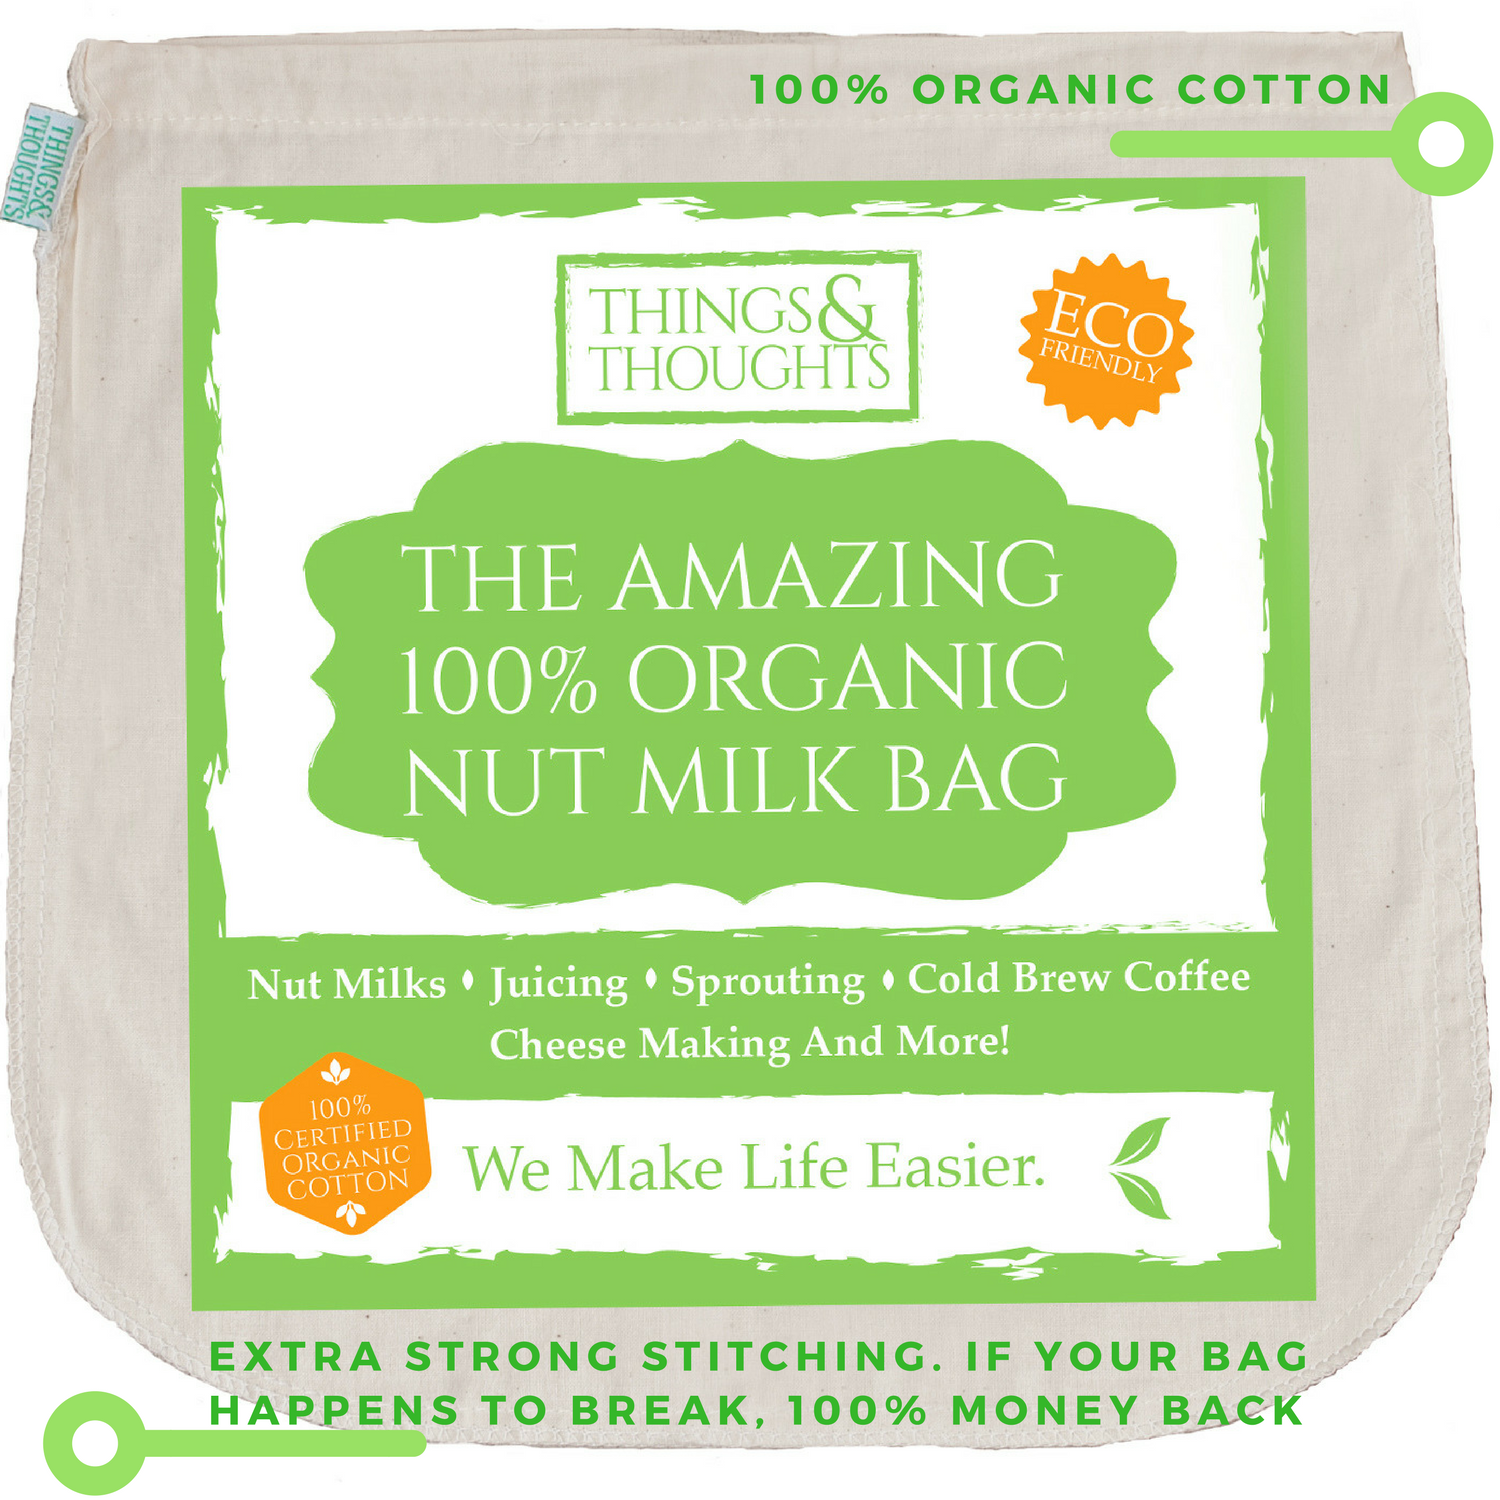 Things & Thoughts The Amazing 100% Organic Nut Milk Bag